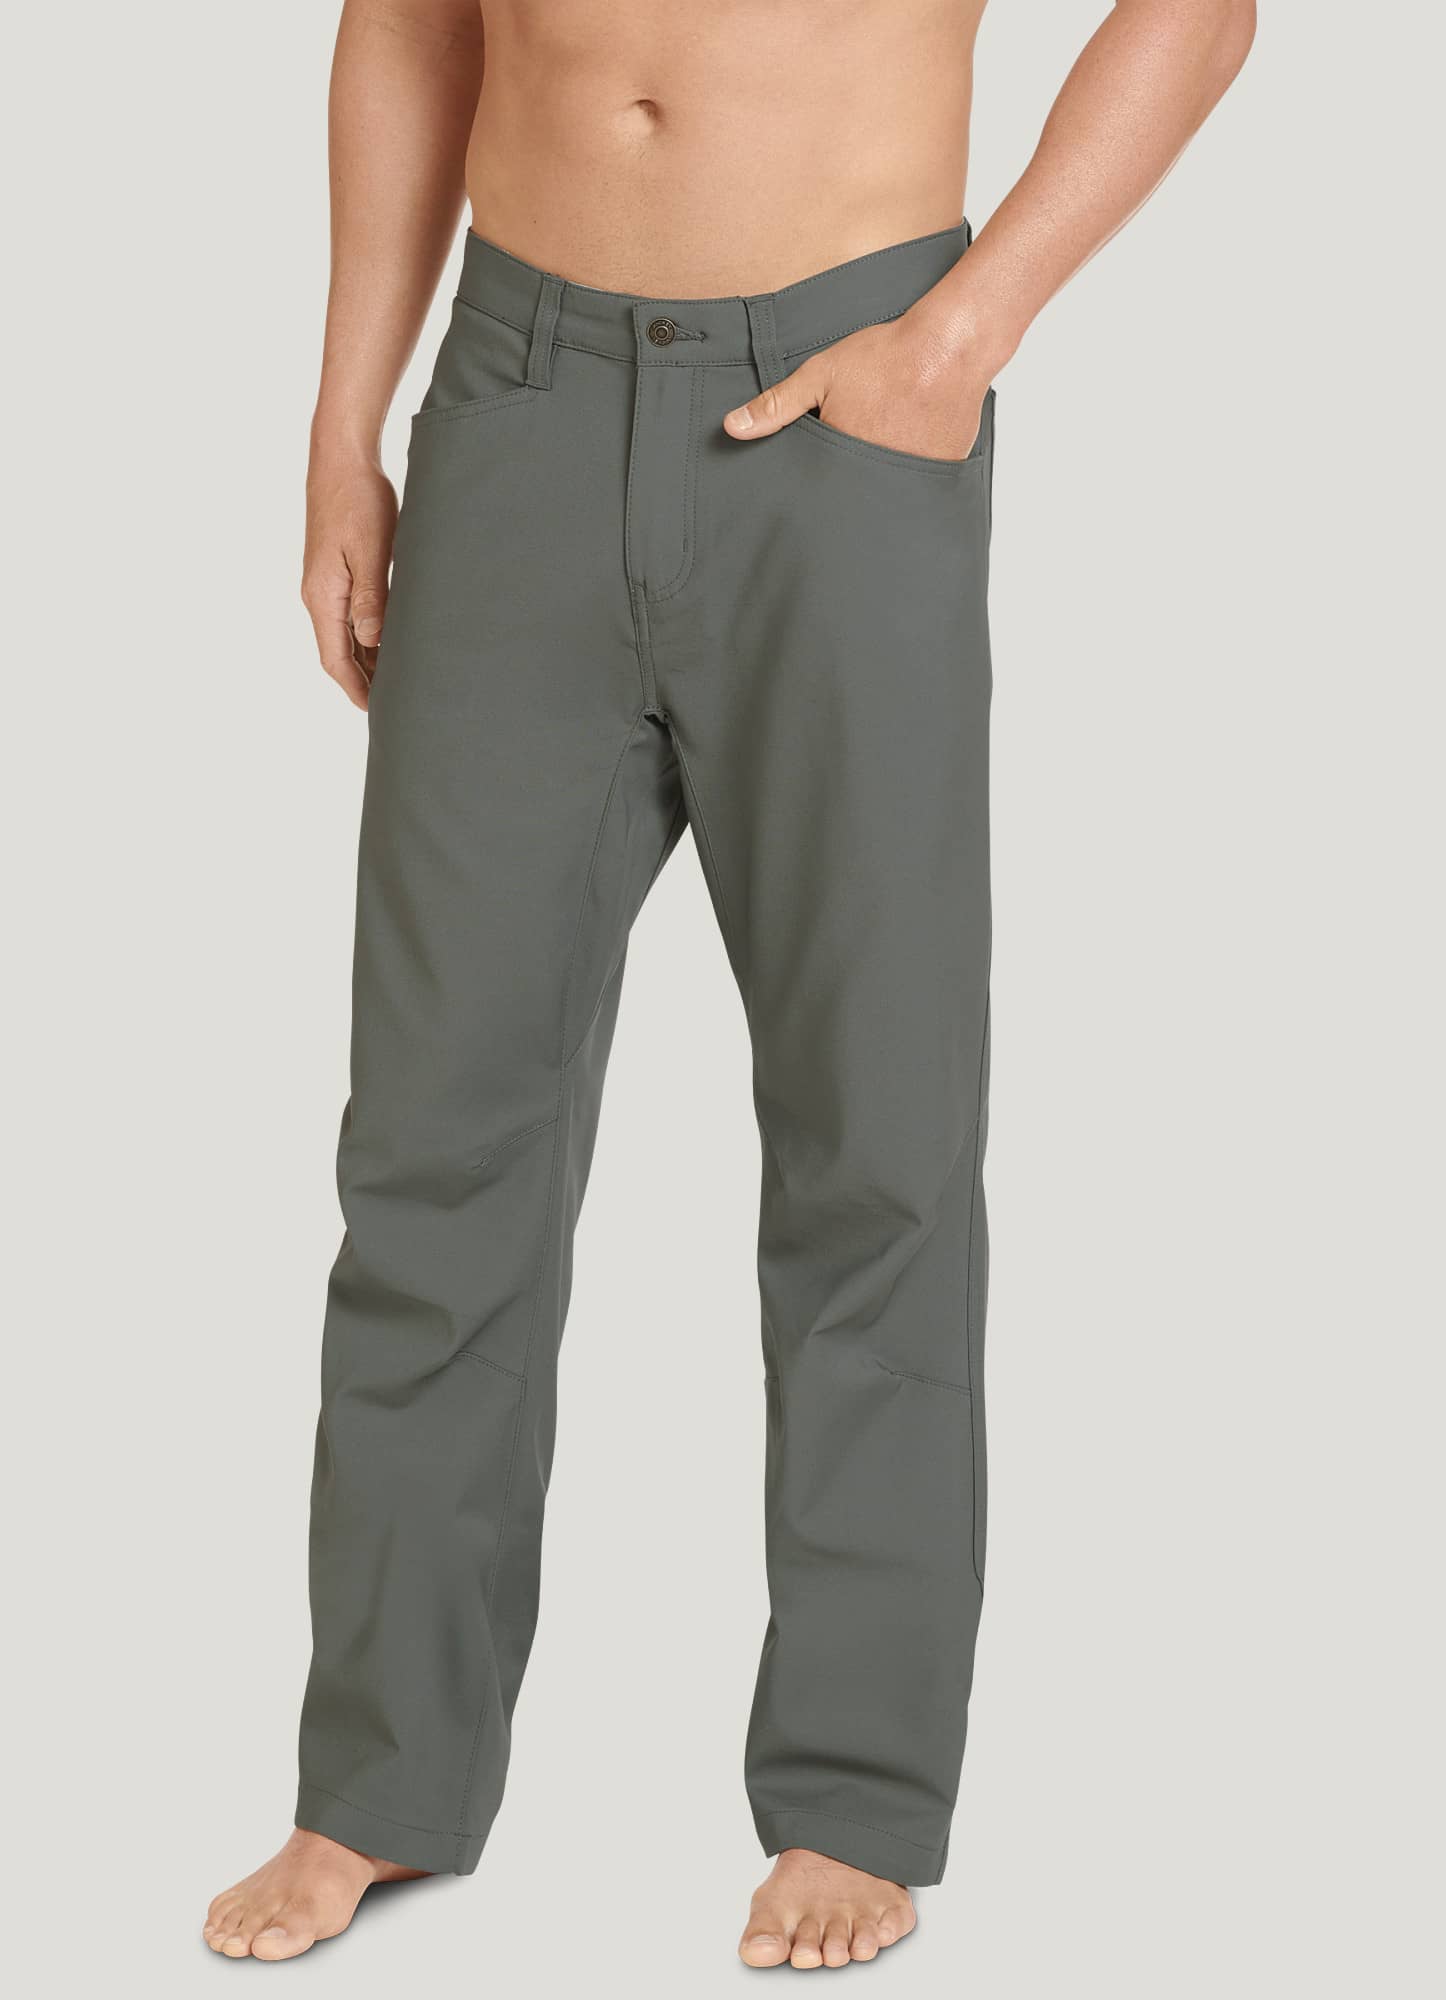 Jockey Sports Pant - Get Best Price from Manufacturers & Suppliers